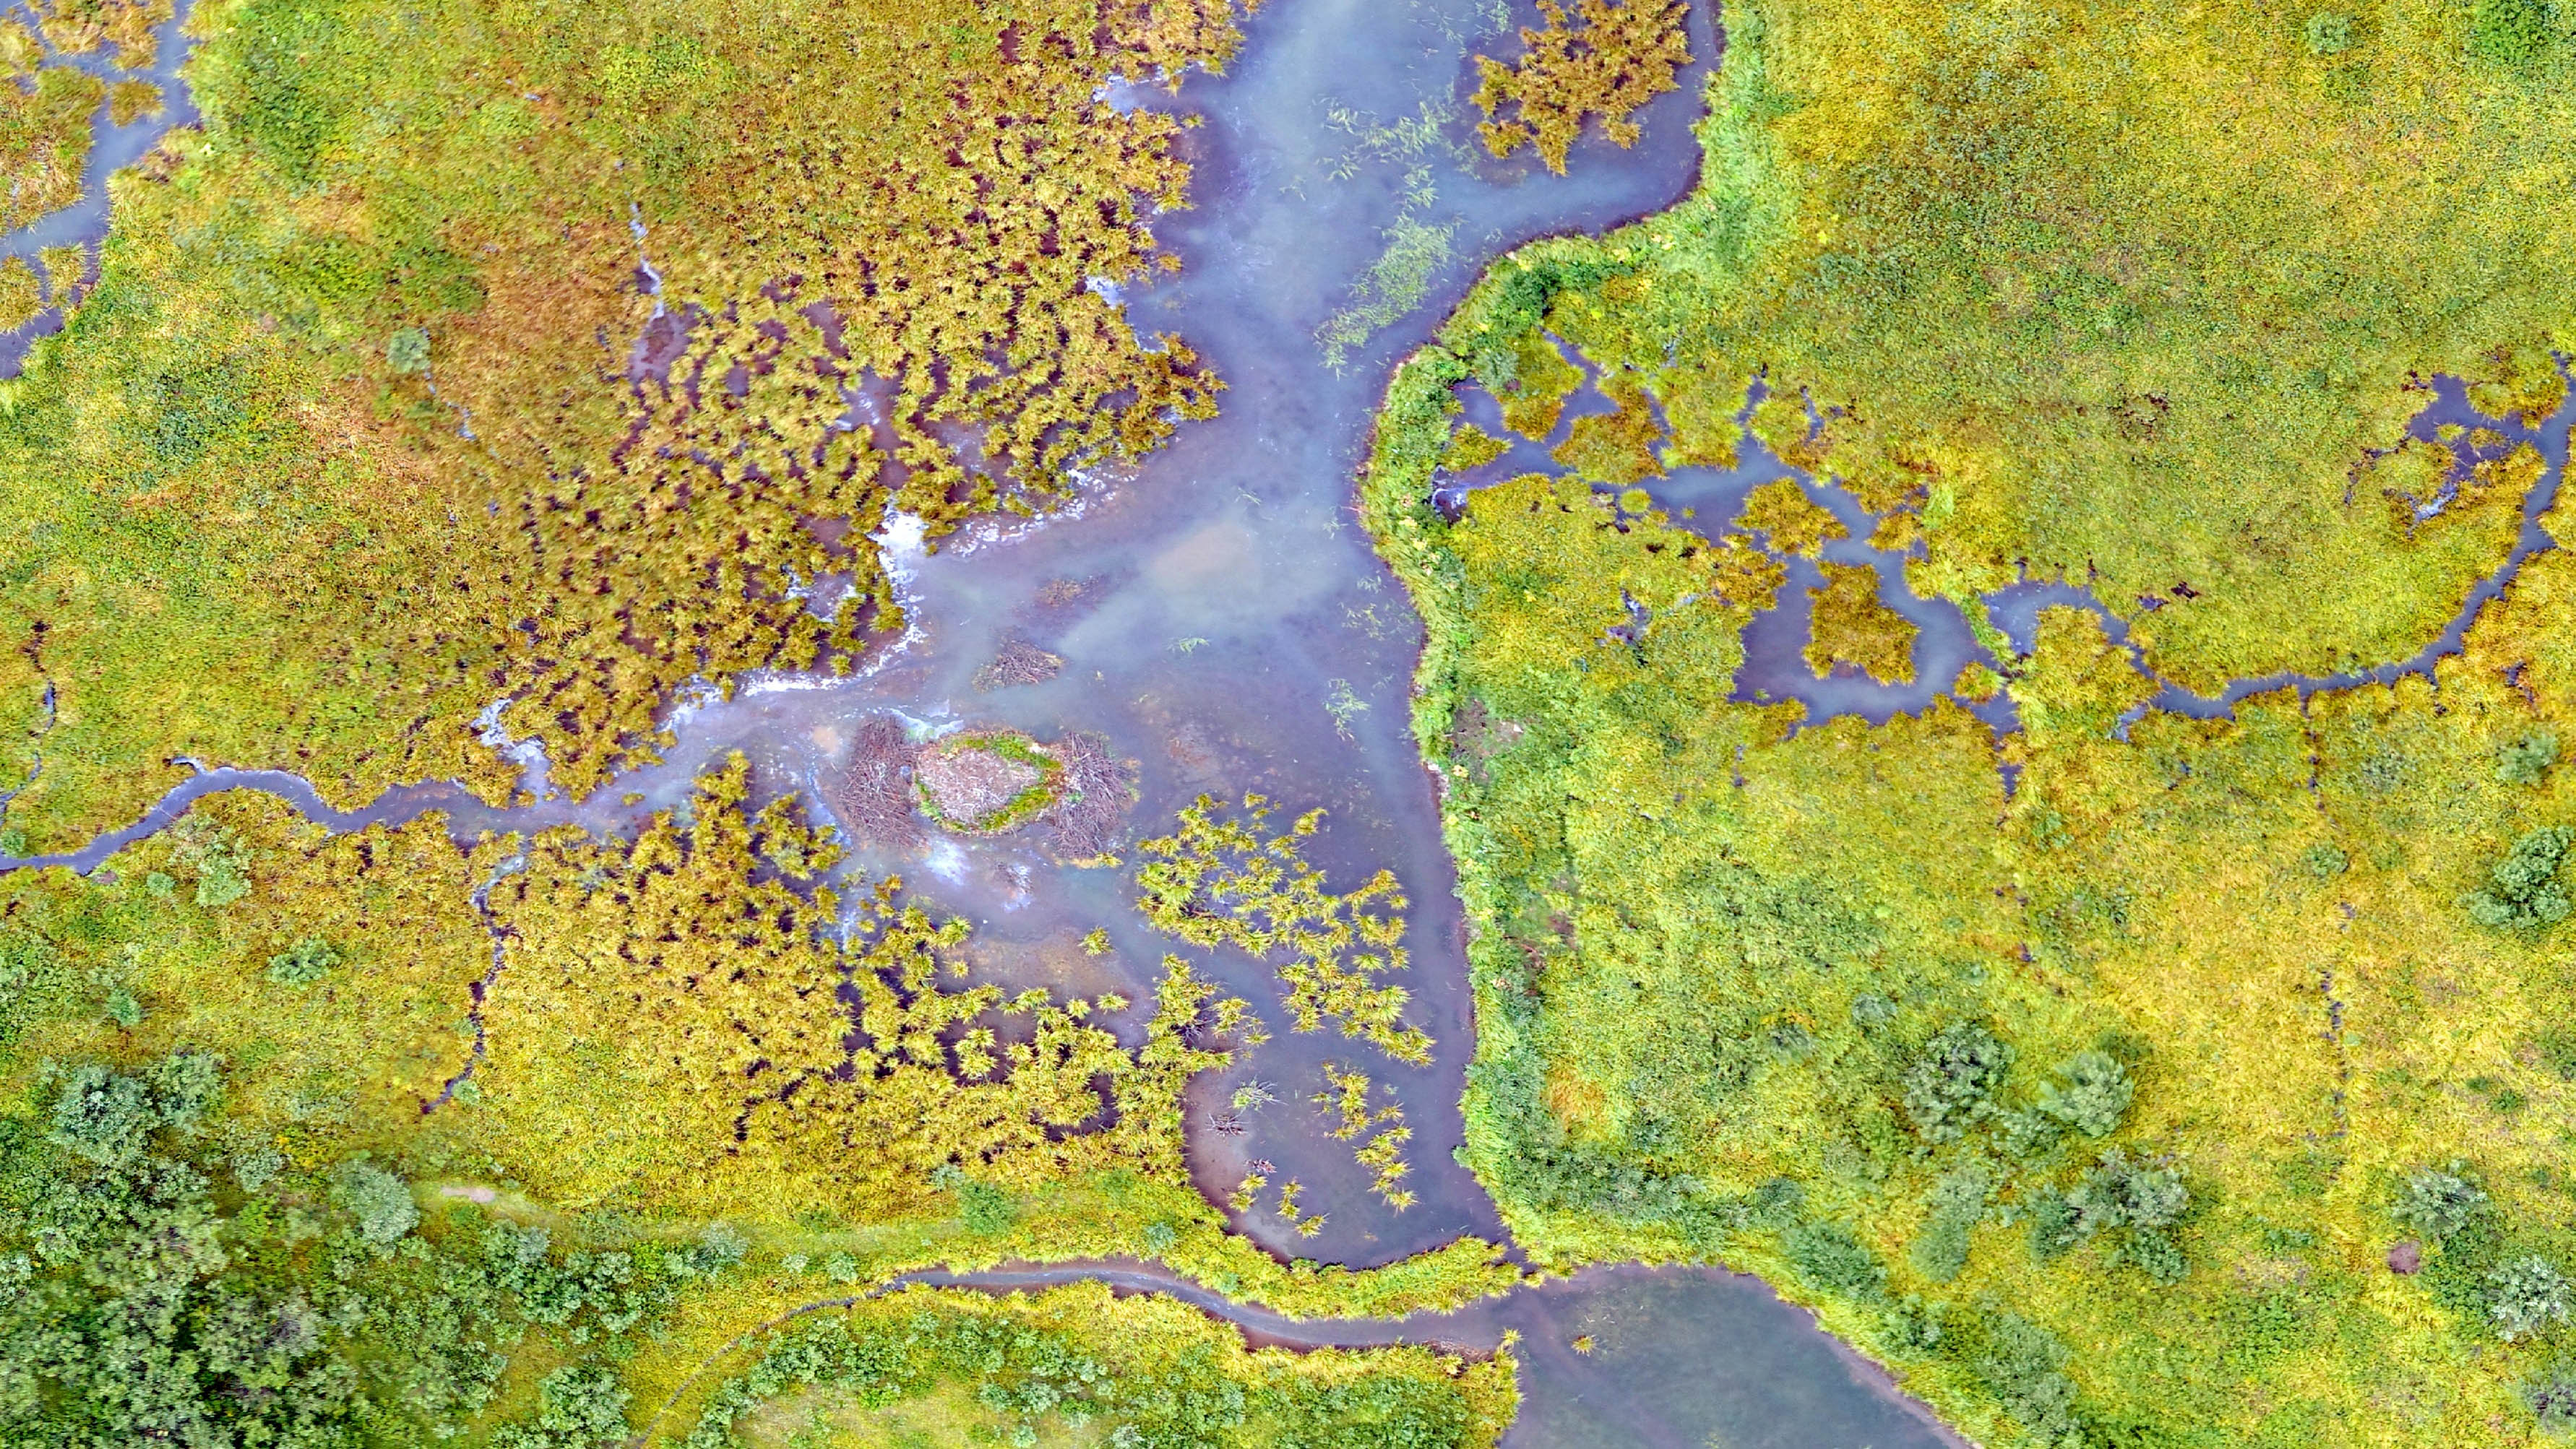 Aerial view of a fen in the Rocky Mountains - bright green vegetation surrounds areas of open water.